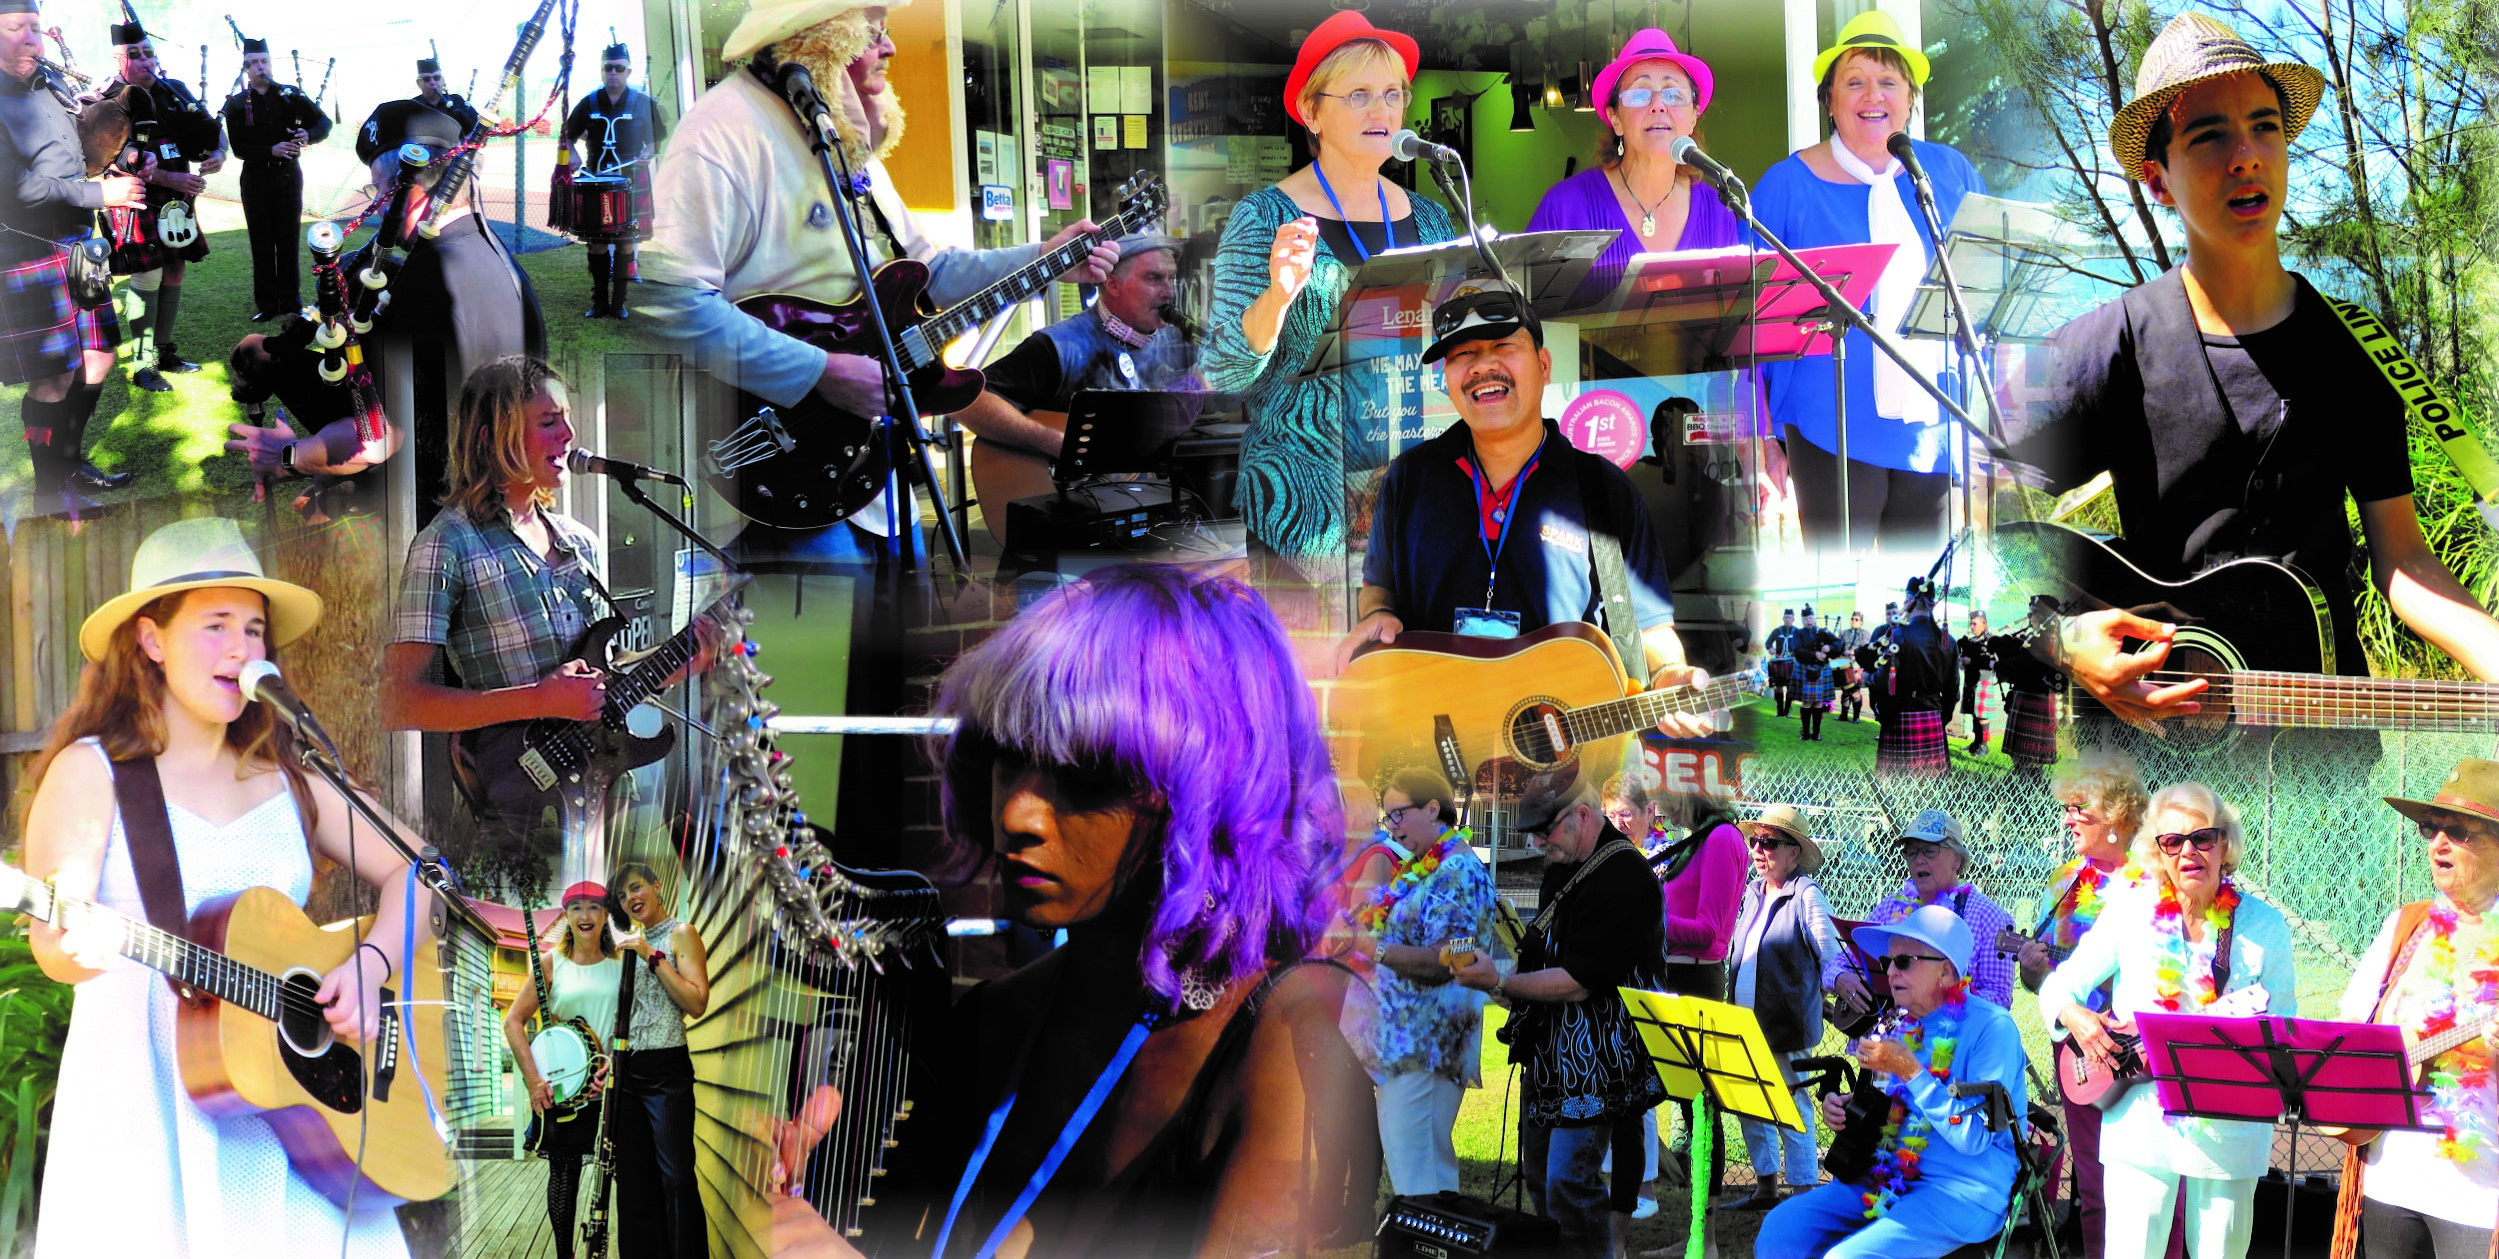 Entry deadline extended for Narooma Busking Festival on May 25